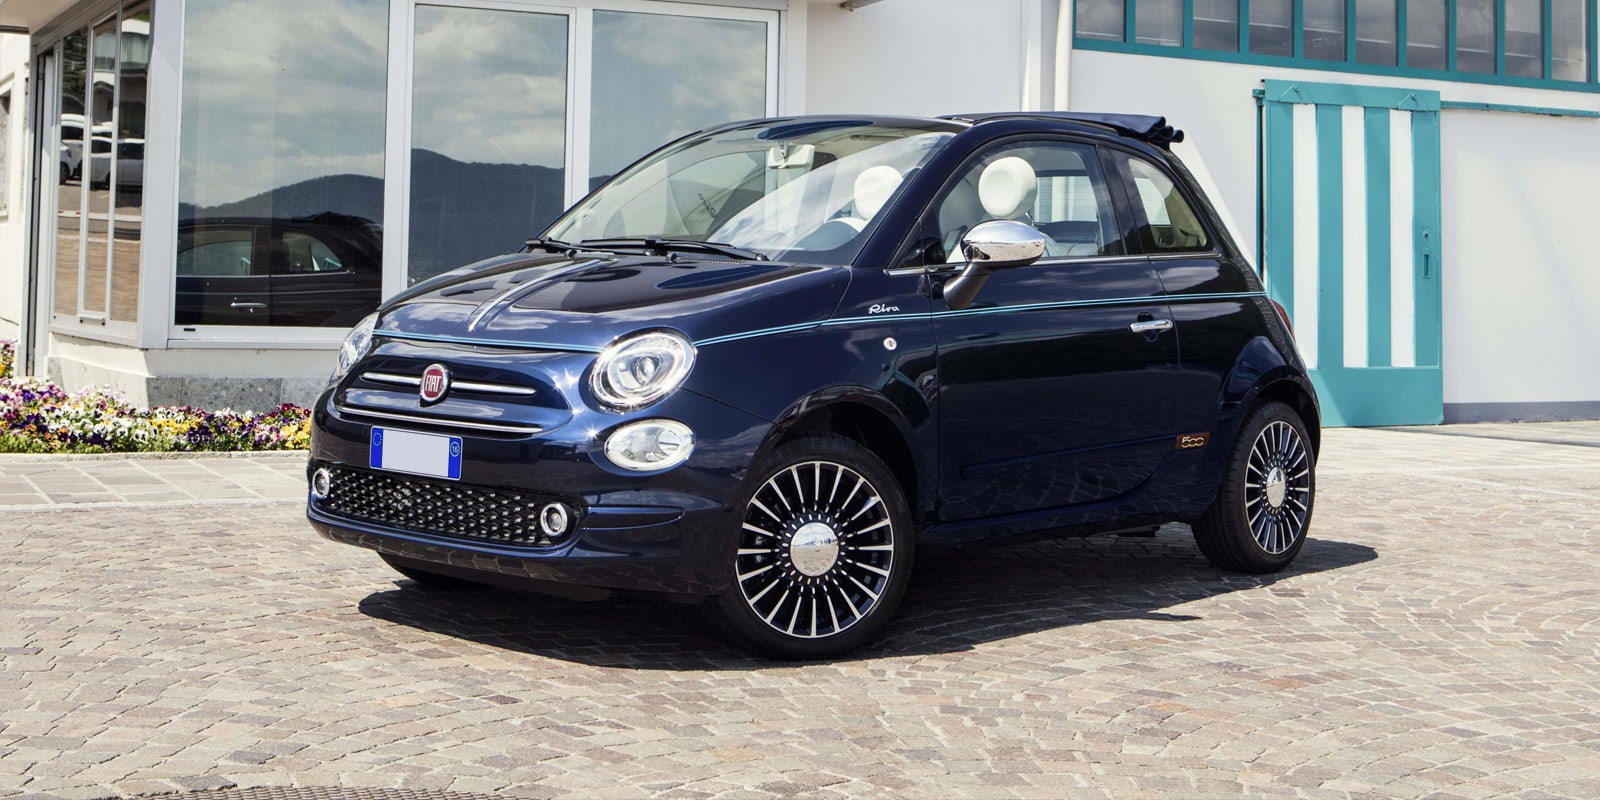 Fiat 500 Riva special edition: complete guide | carwow